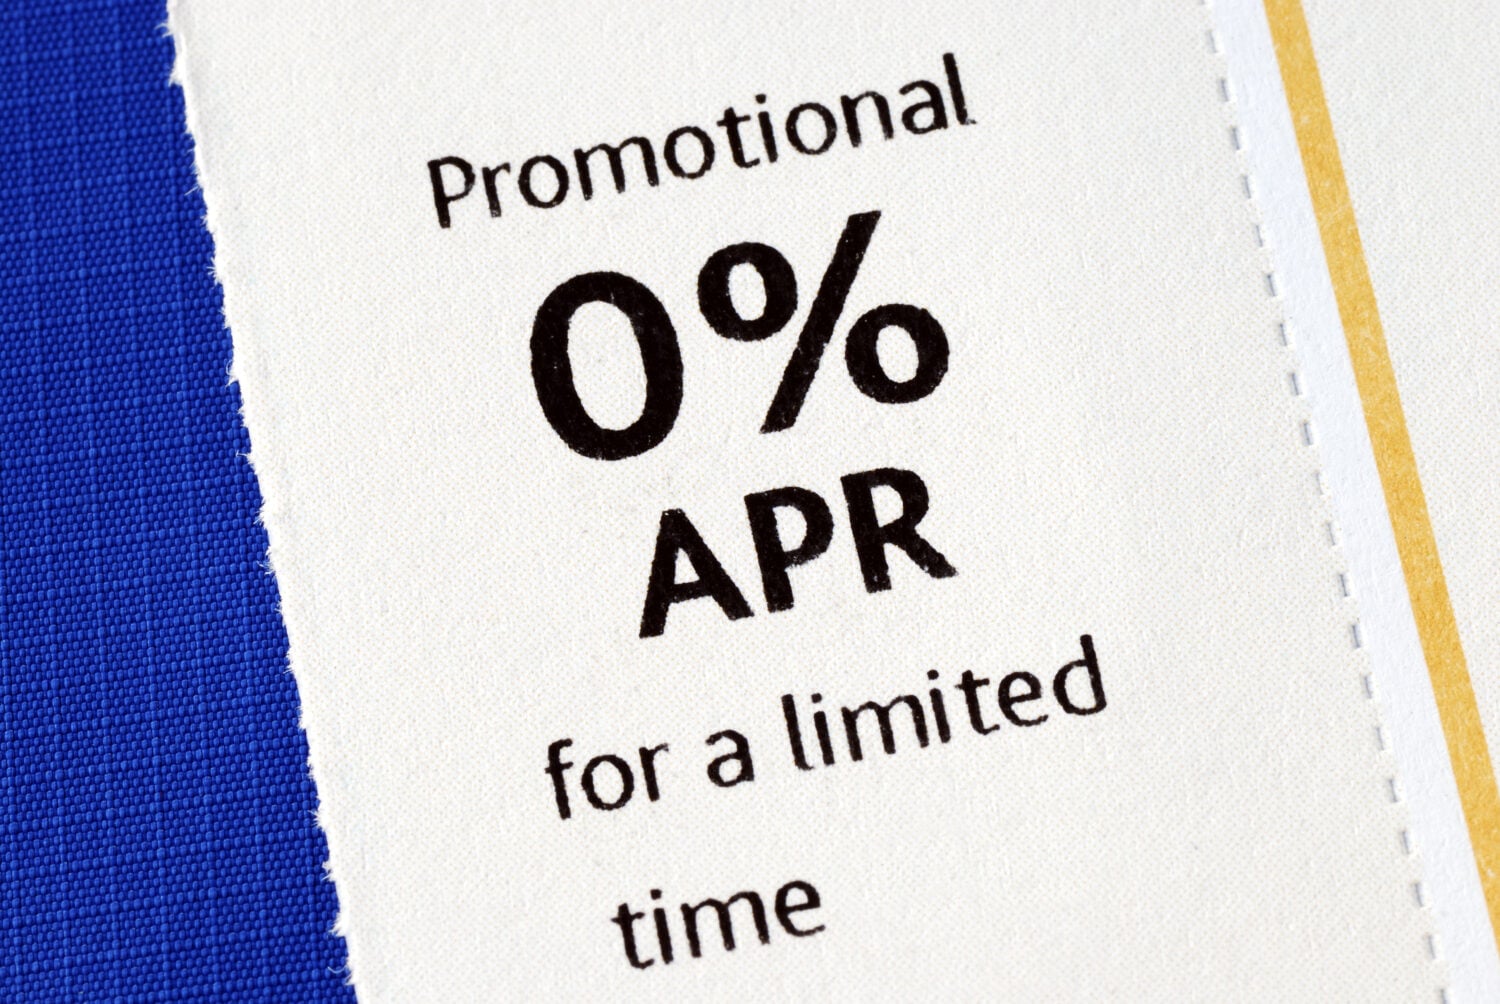 Promotional 0% APR offer isolated on blue